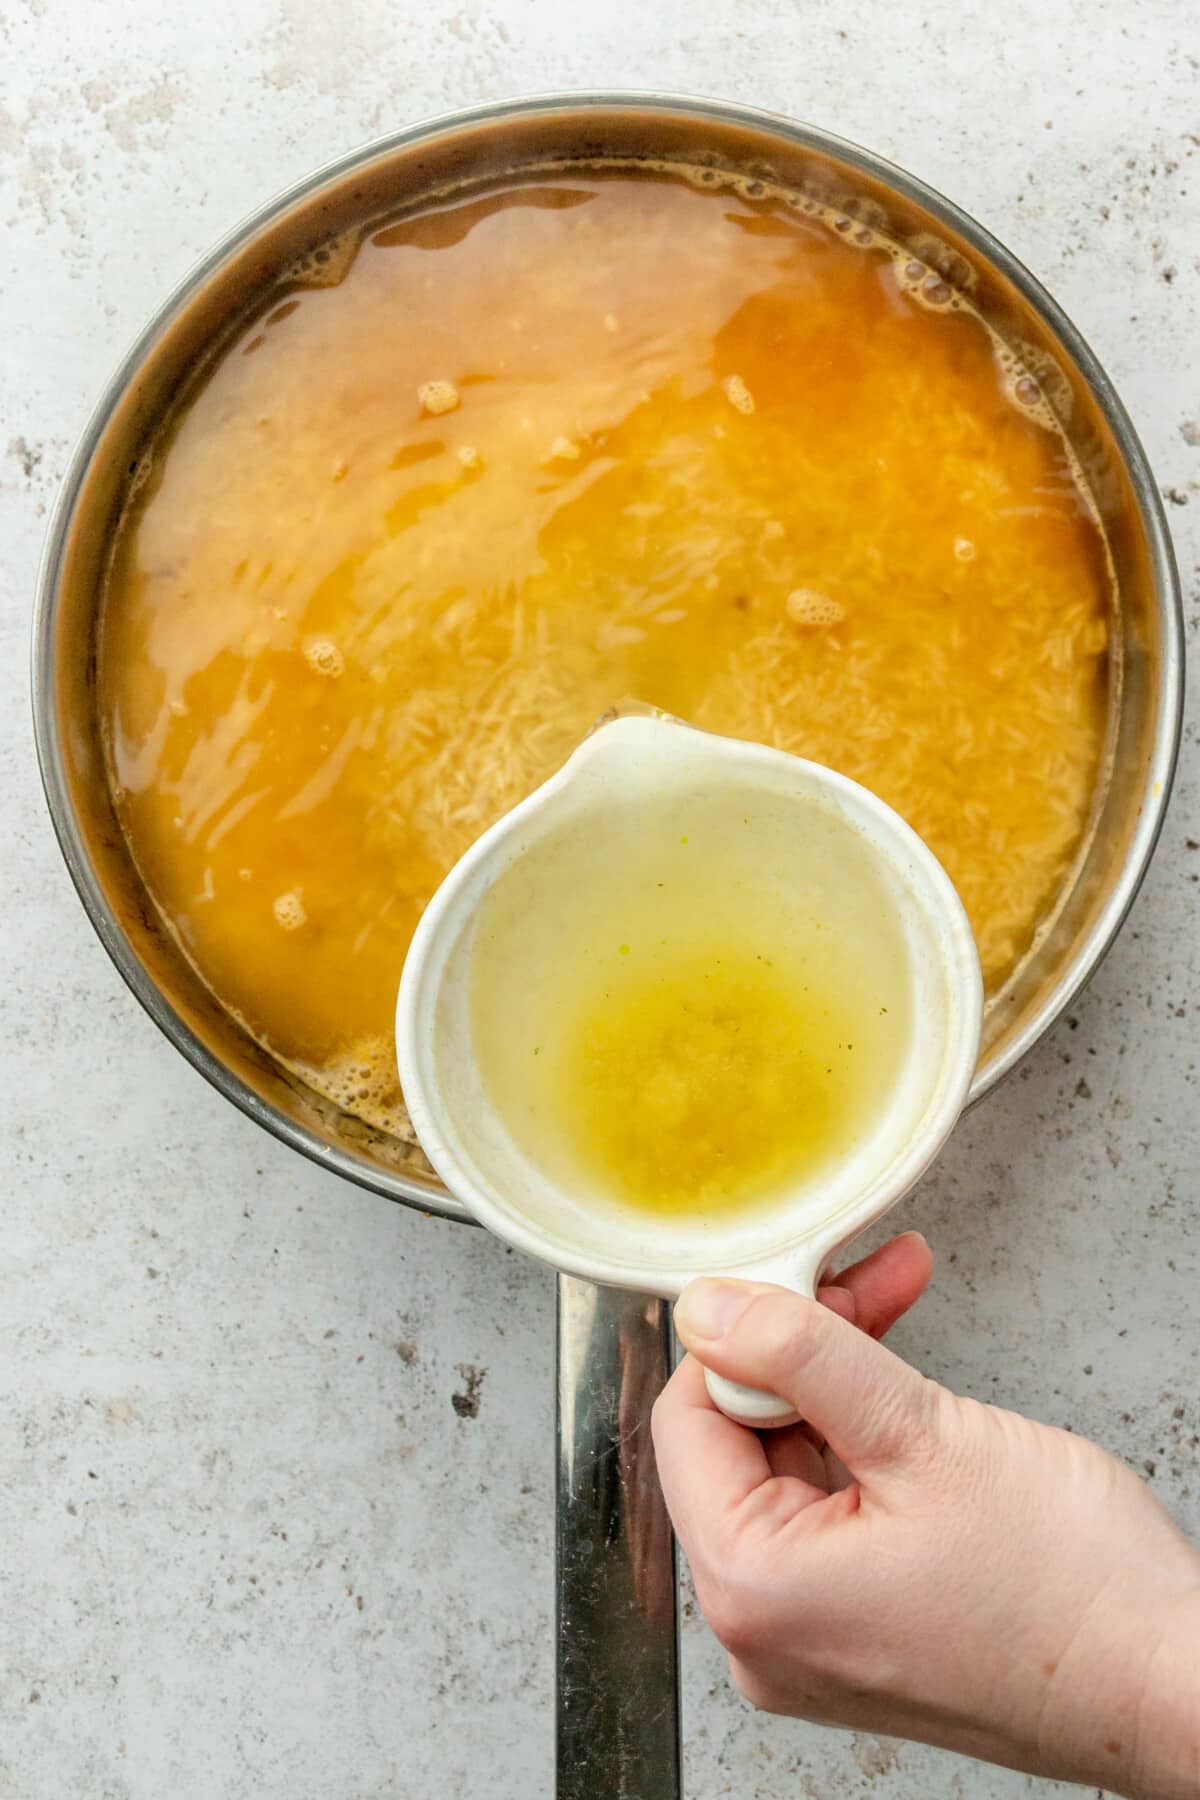 Chicken stock is poured into a stainless steel frying pan on a light grey surface.